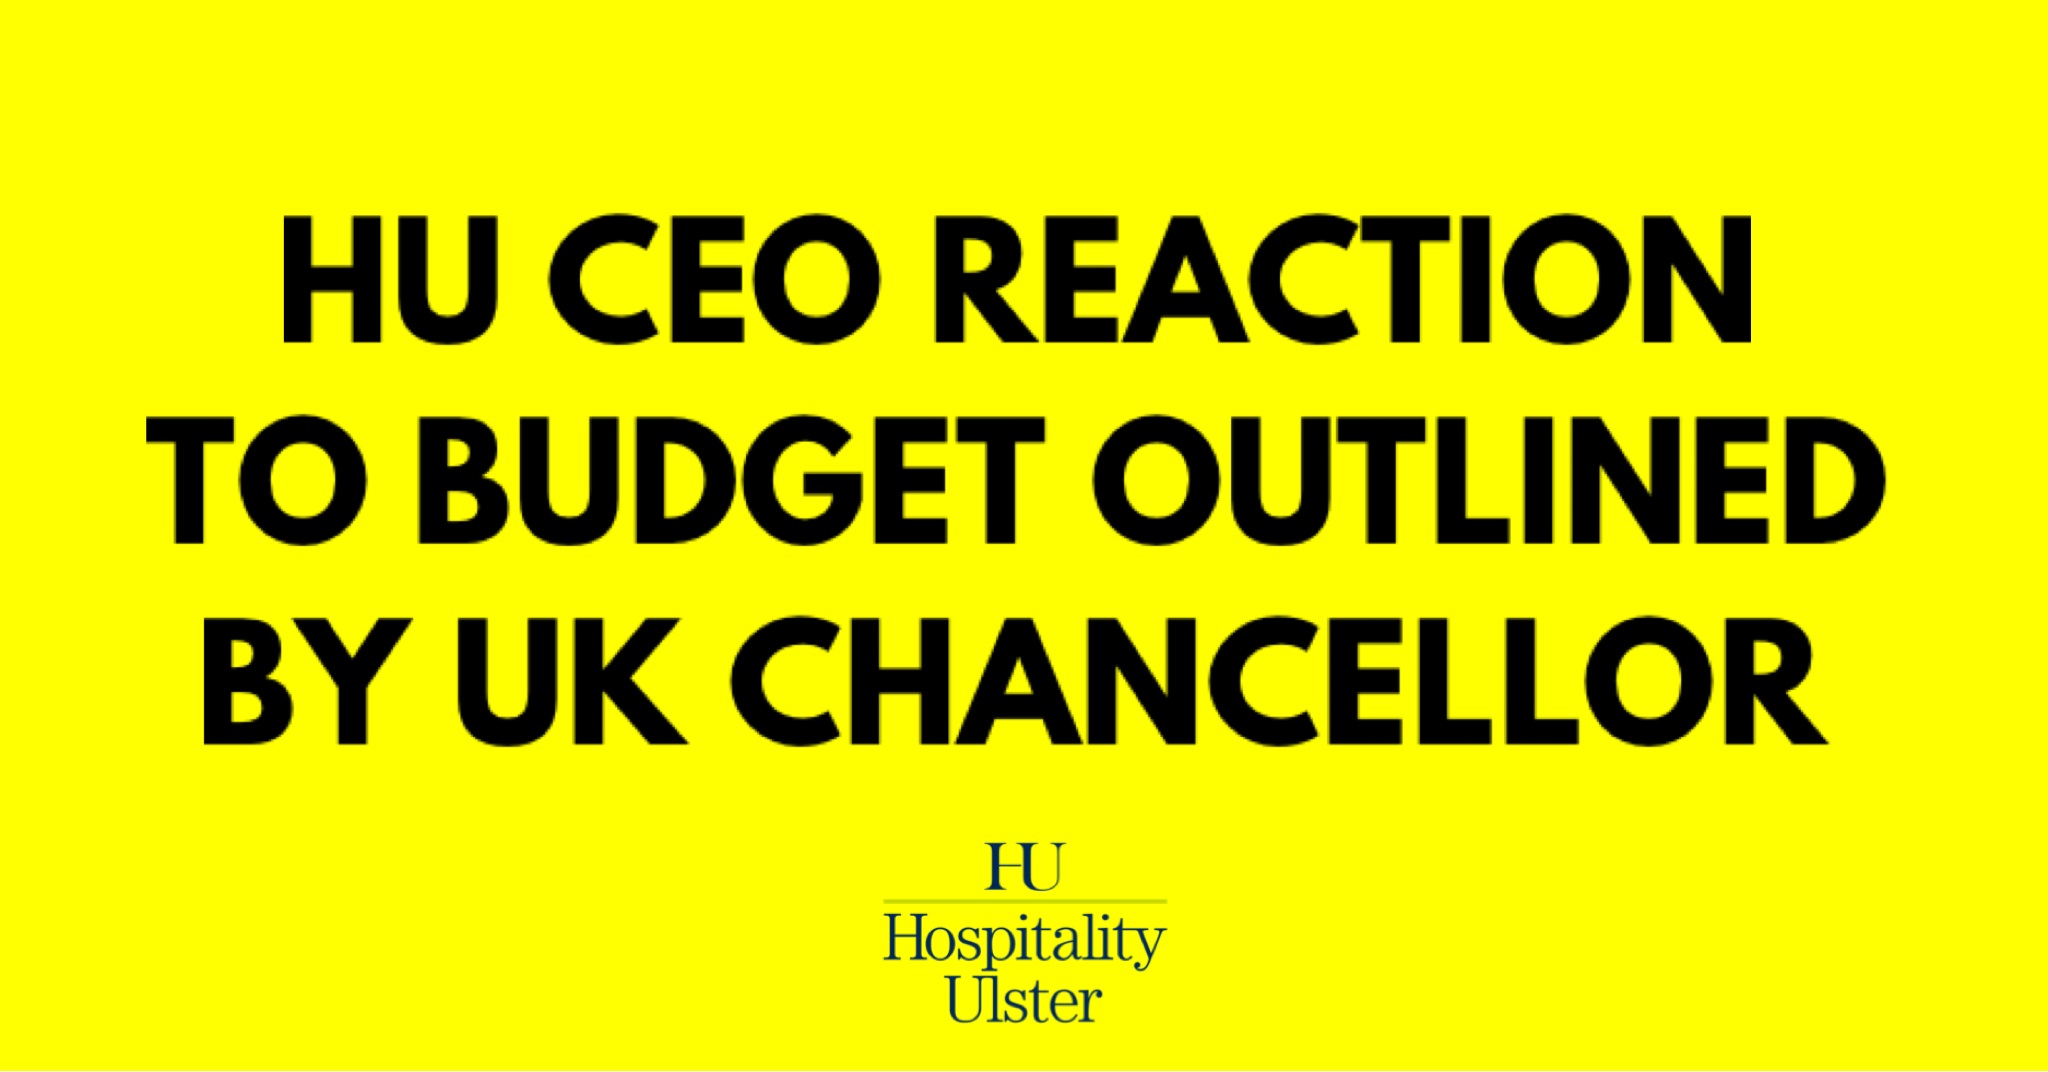 HU CEO REACTION TO BUDGET OUTLINED BY UK CHANCELLOR